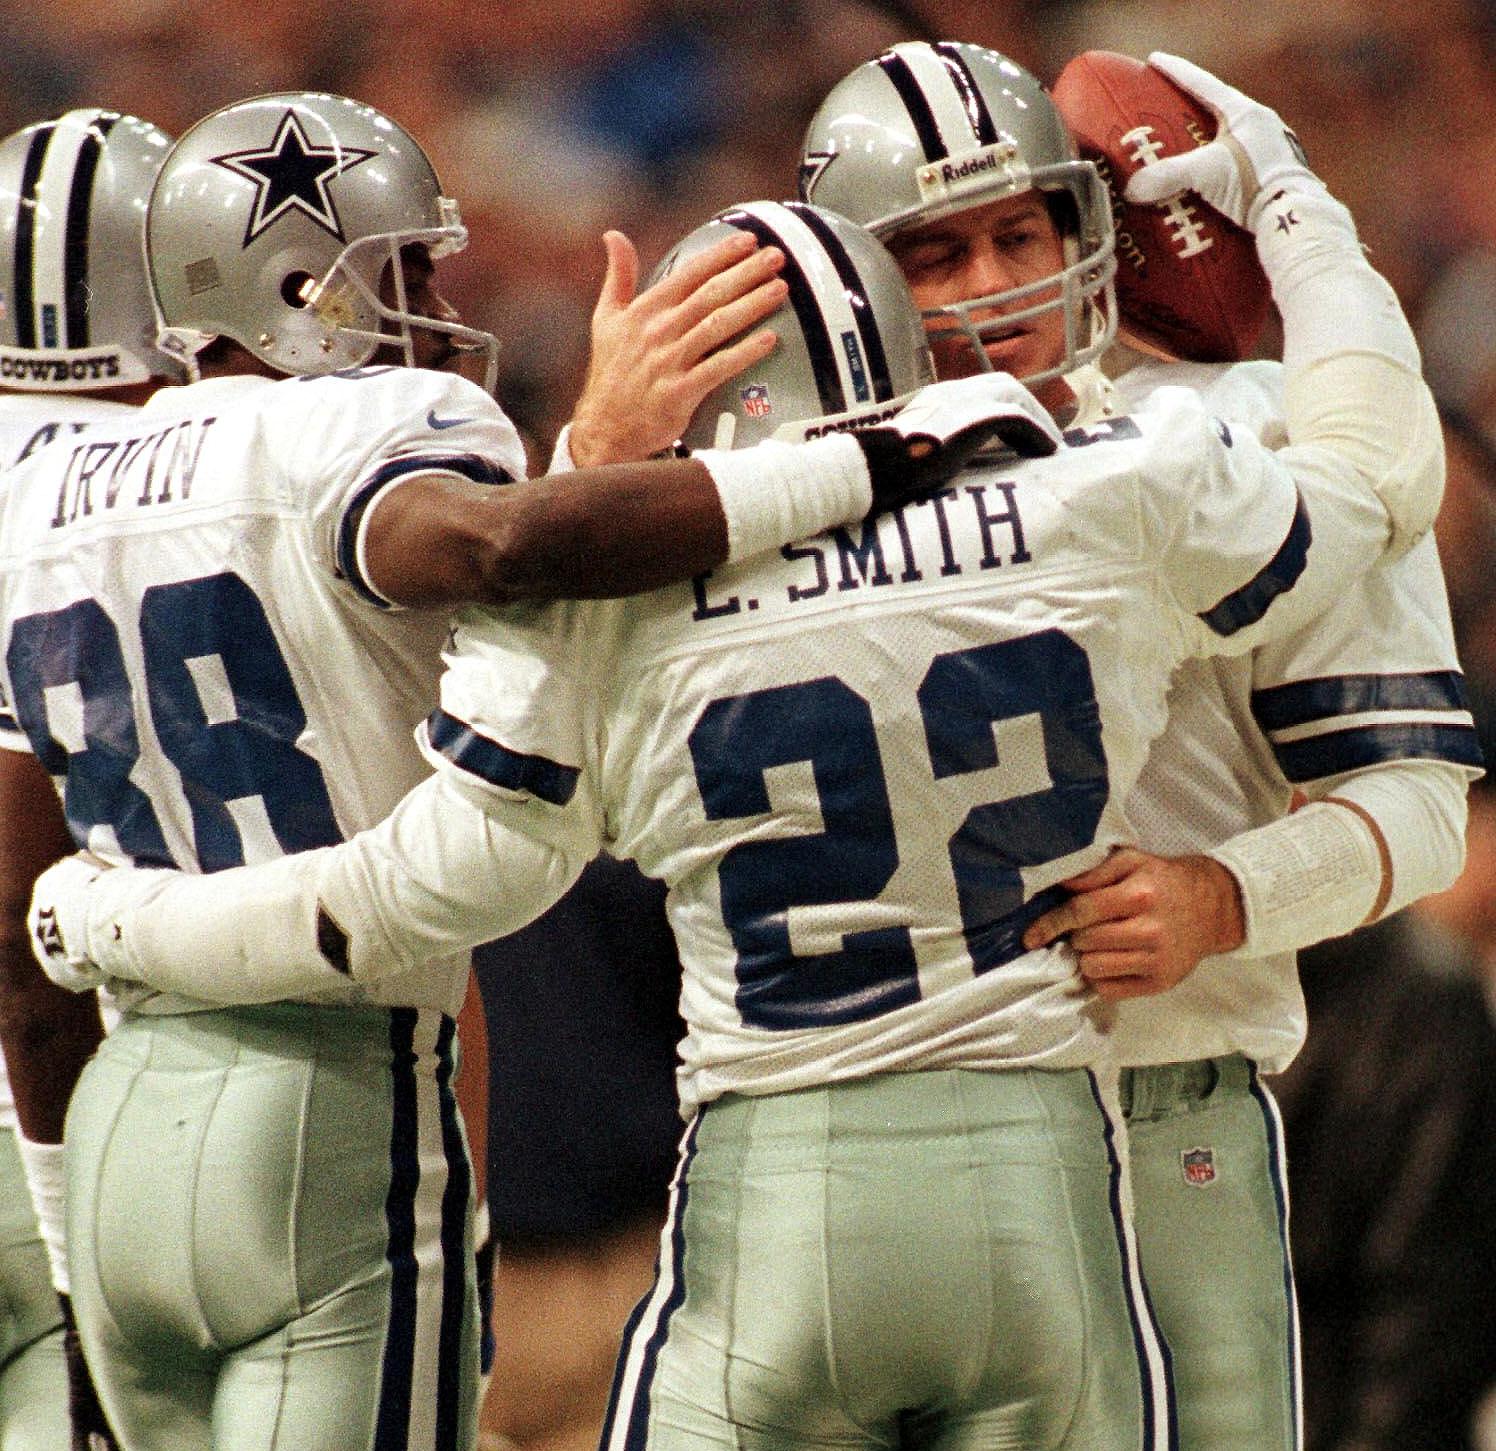 Michael Irvin, Troy Aikman, and Emmitt Smith of the Dallas Cowboys